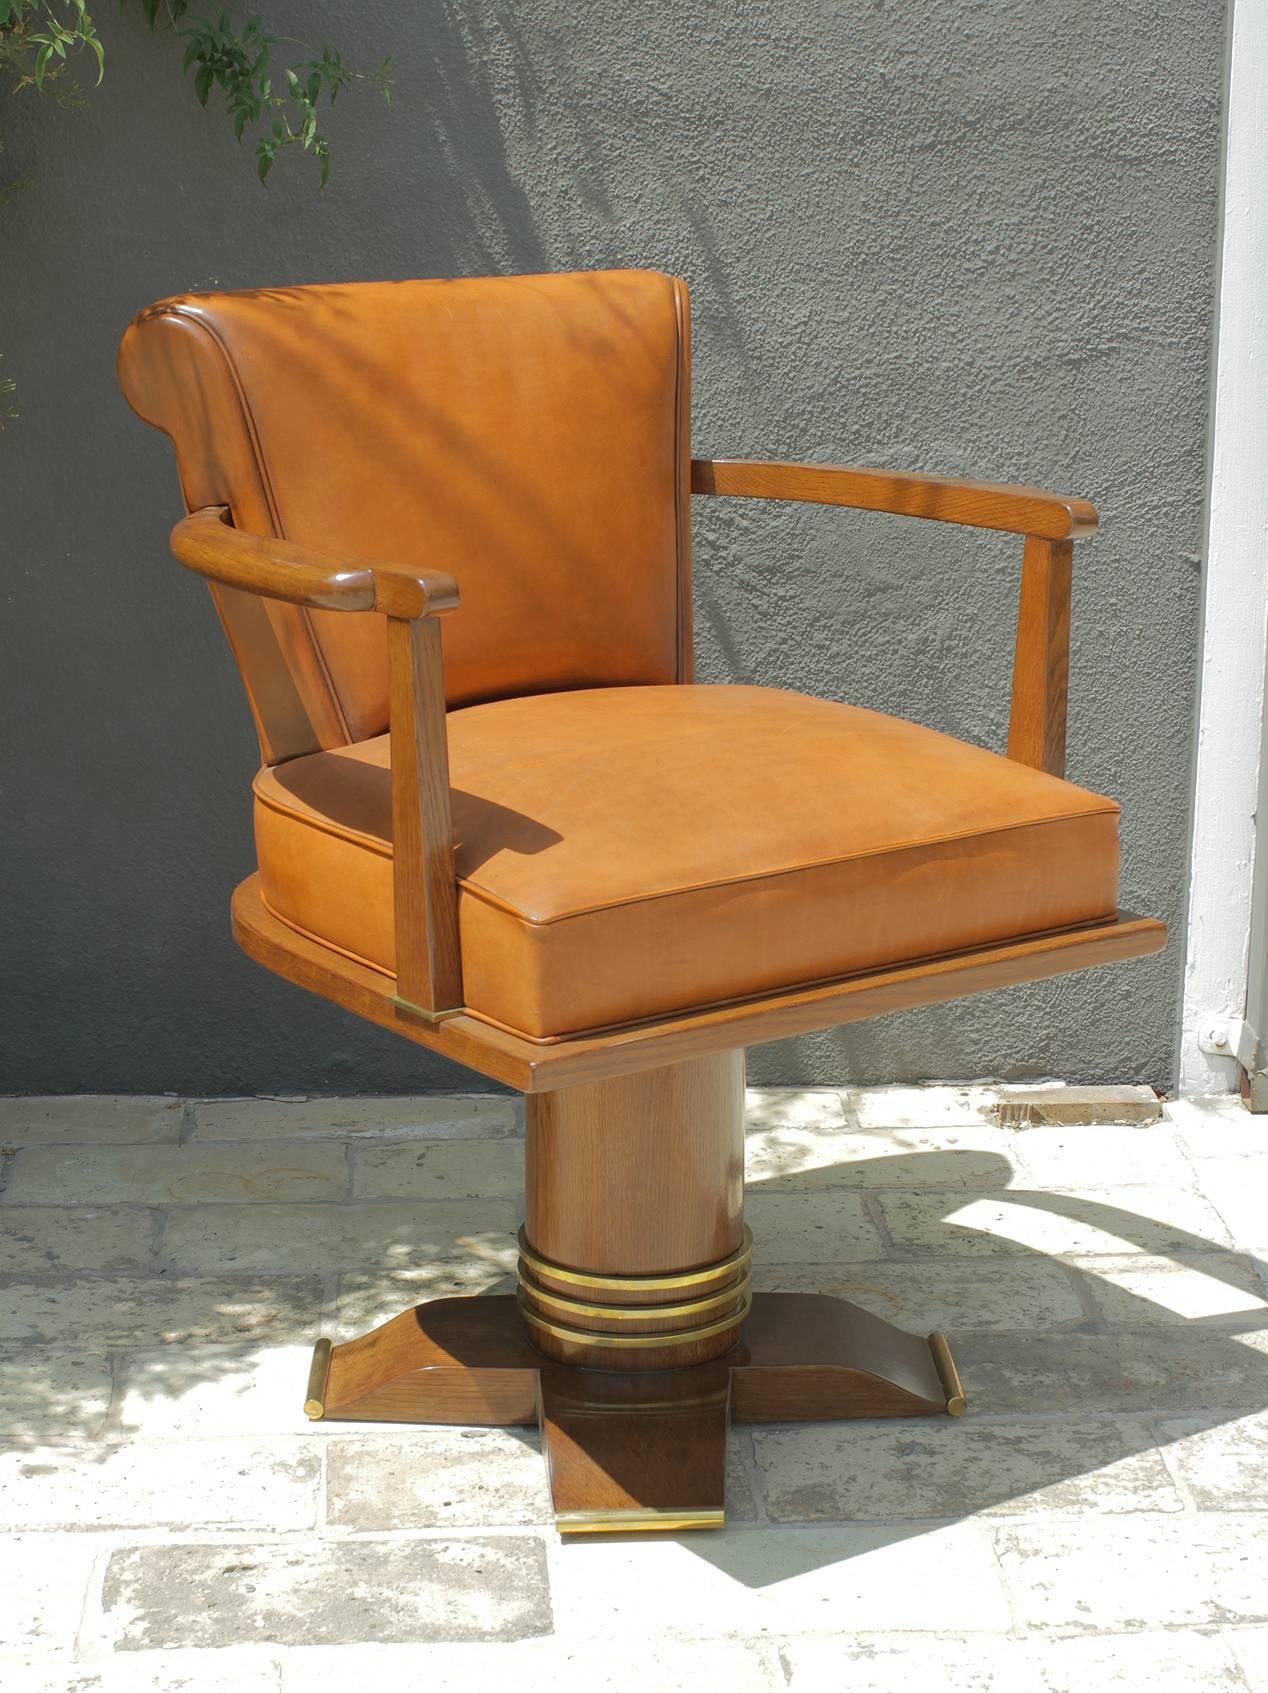 Exceptional and rare oak and brass swivel desk chair attributed to Jules Leleu, France, 1930.
Upholstered in patinated camel leather.
Refinished.
The quality of this piece is remarkable and finding a chair like this one is equally as rare from